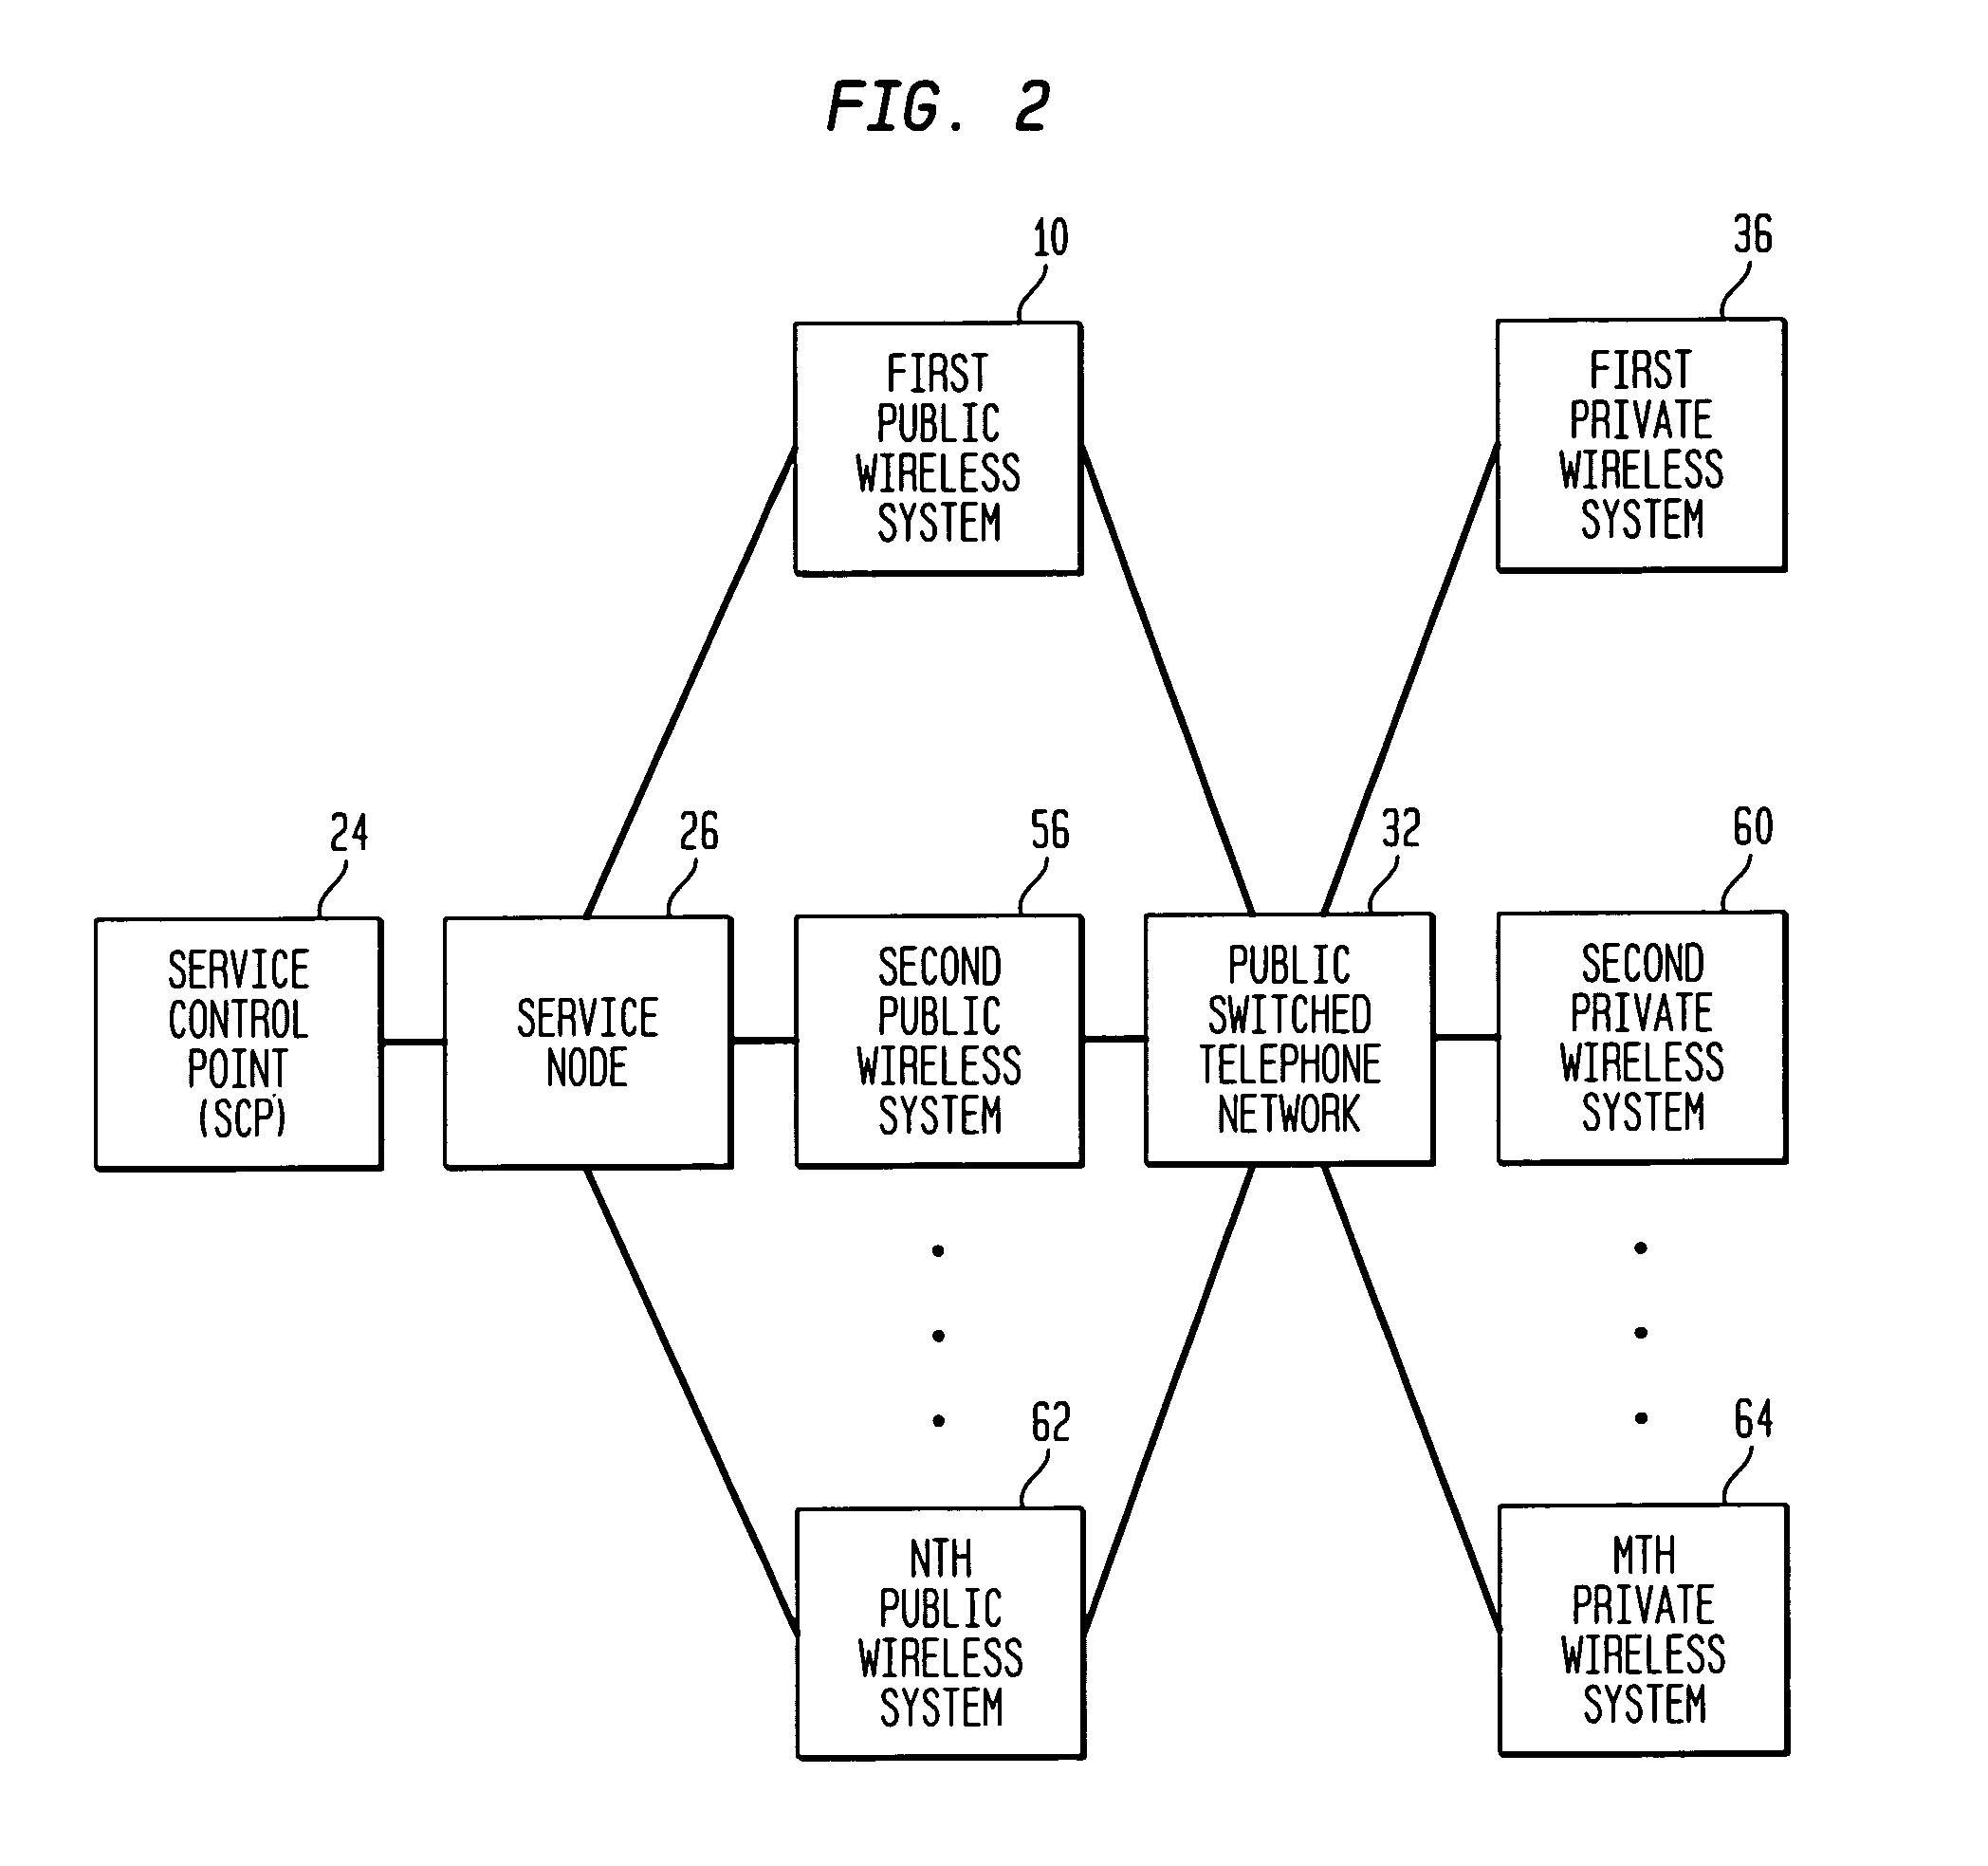 Method and system for directing a data message in a wireless communications network including multiple wireless systems